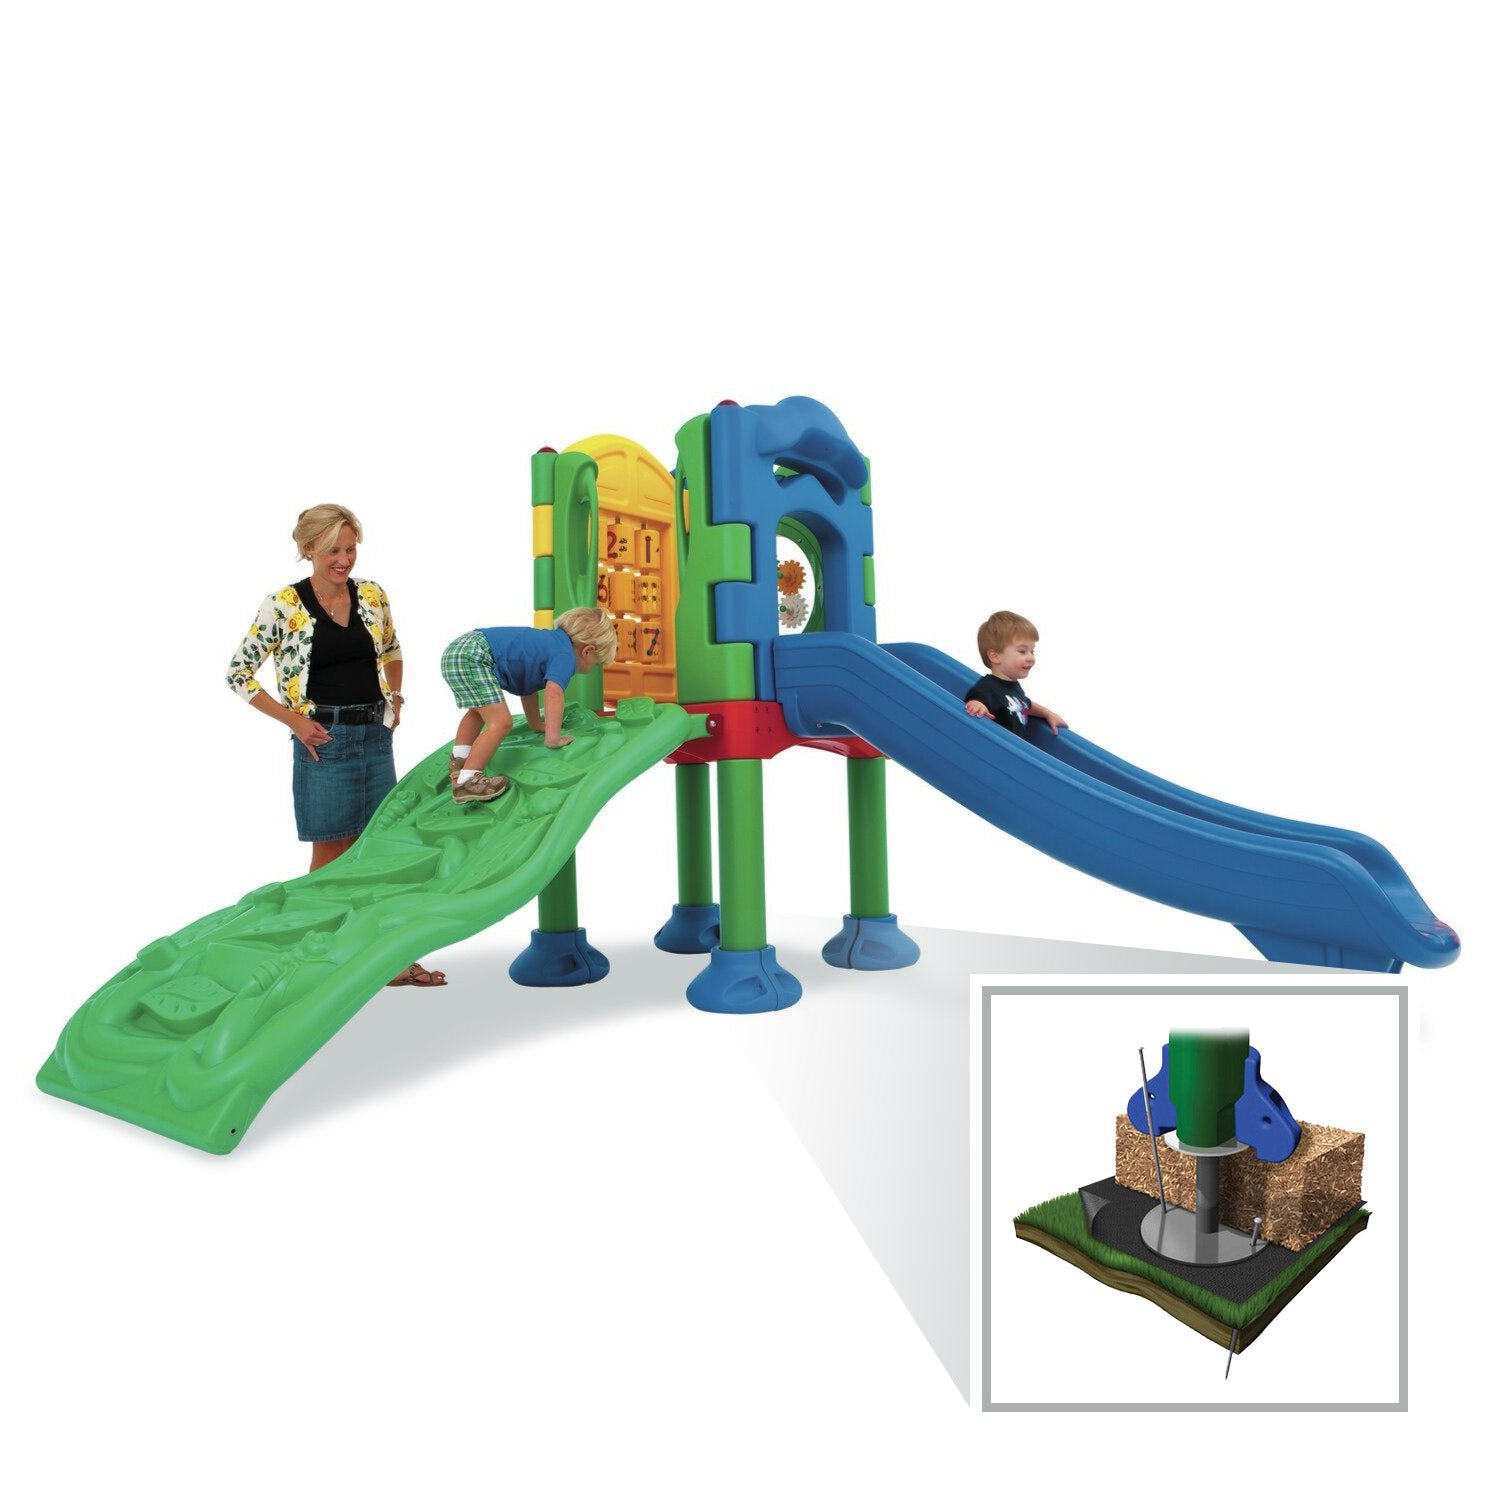 UltraPlay Discovery Hilltop Playground with No Roof for Children | Toddler Playground